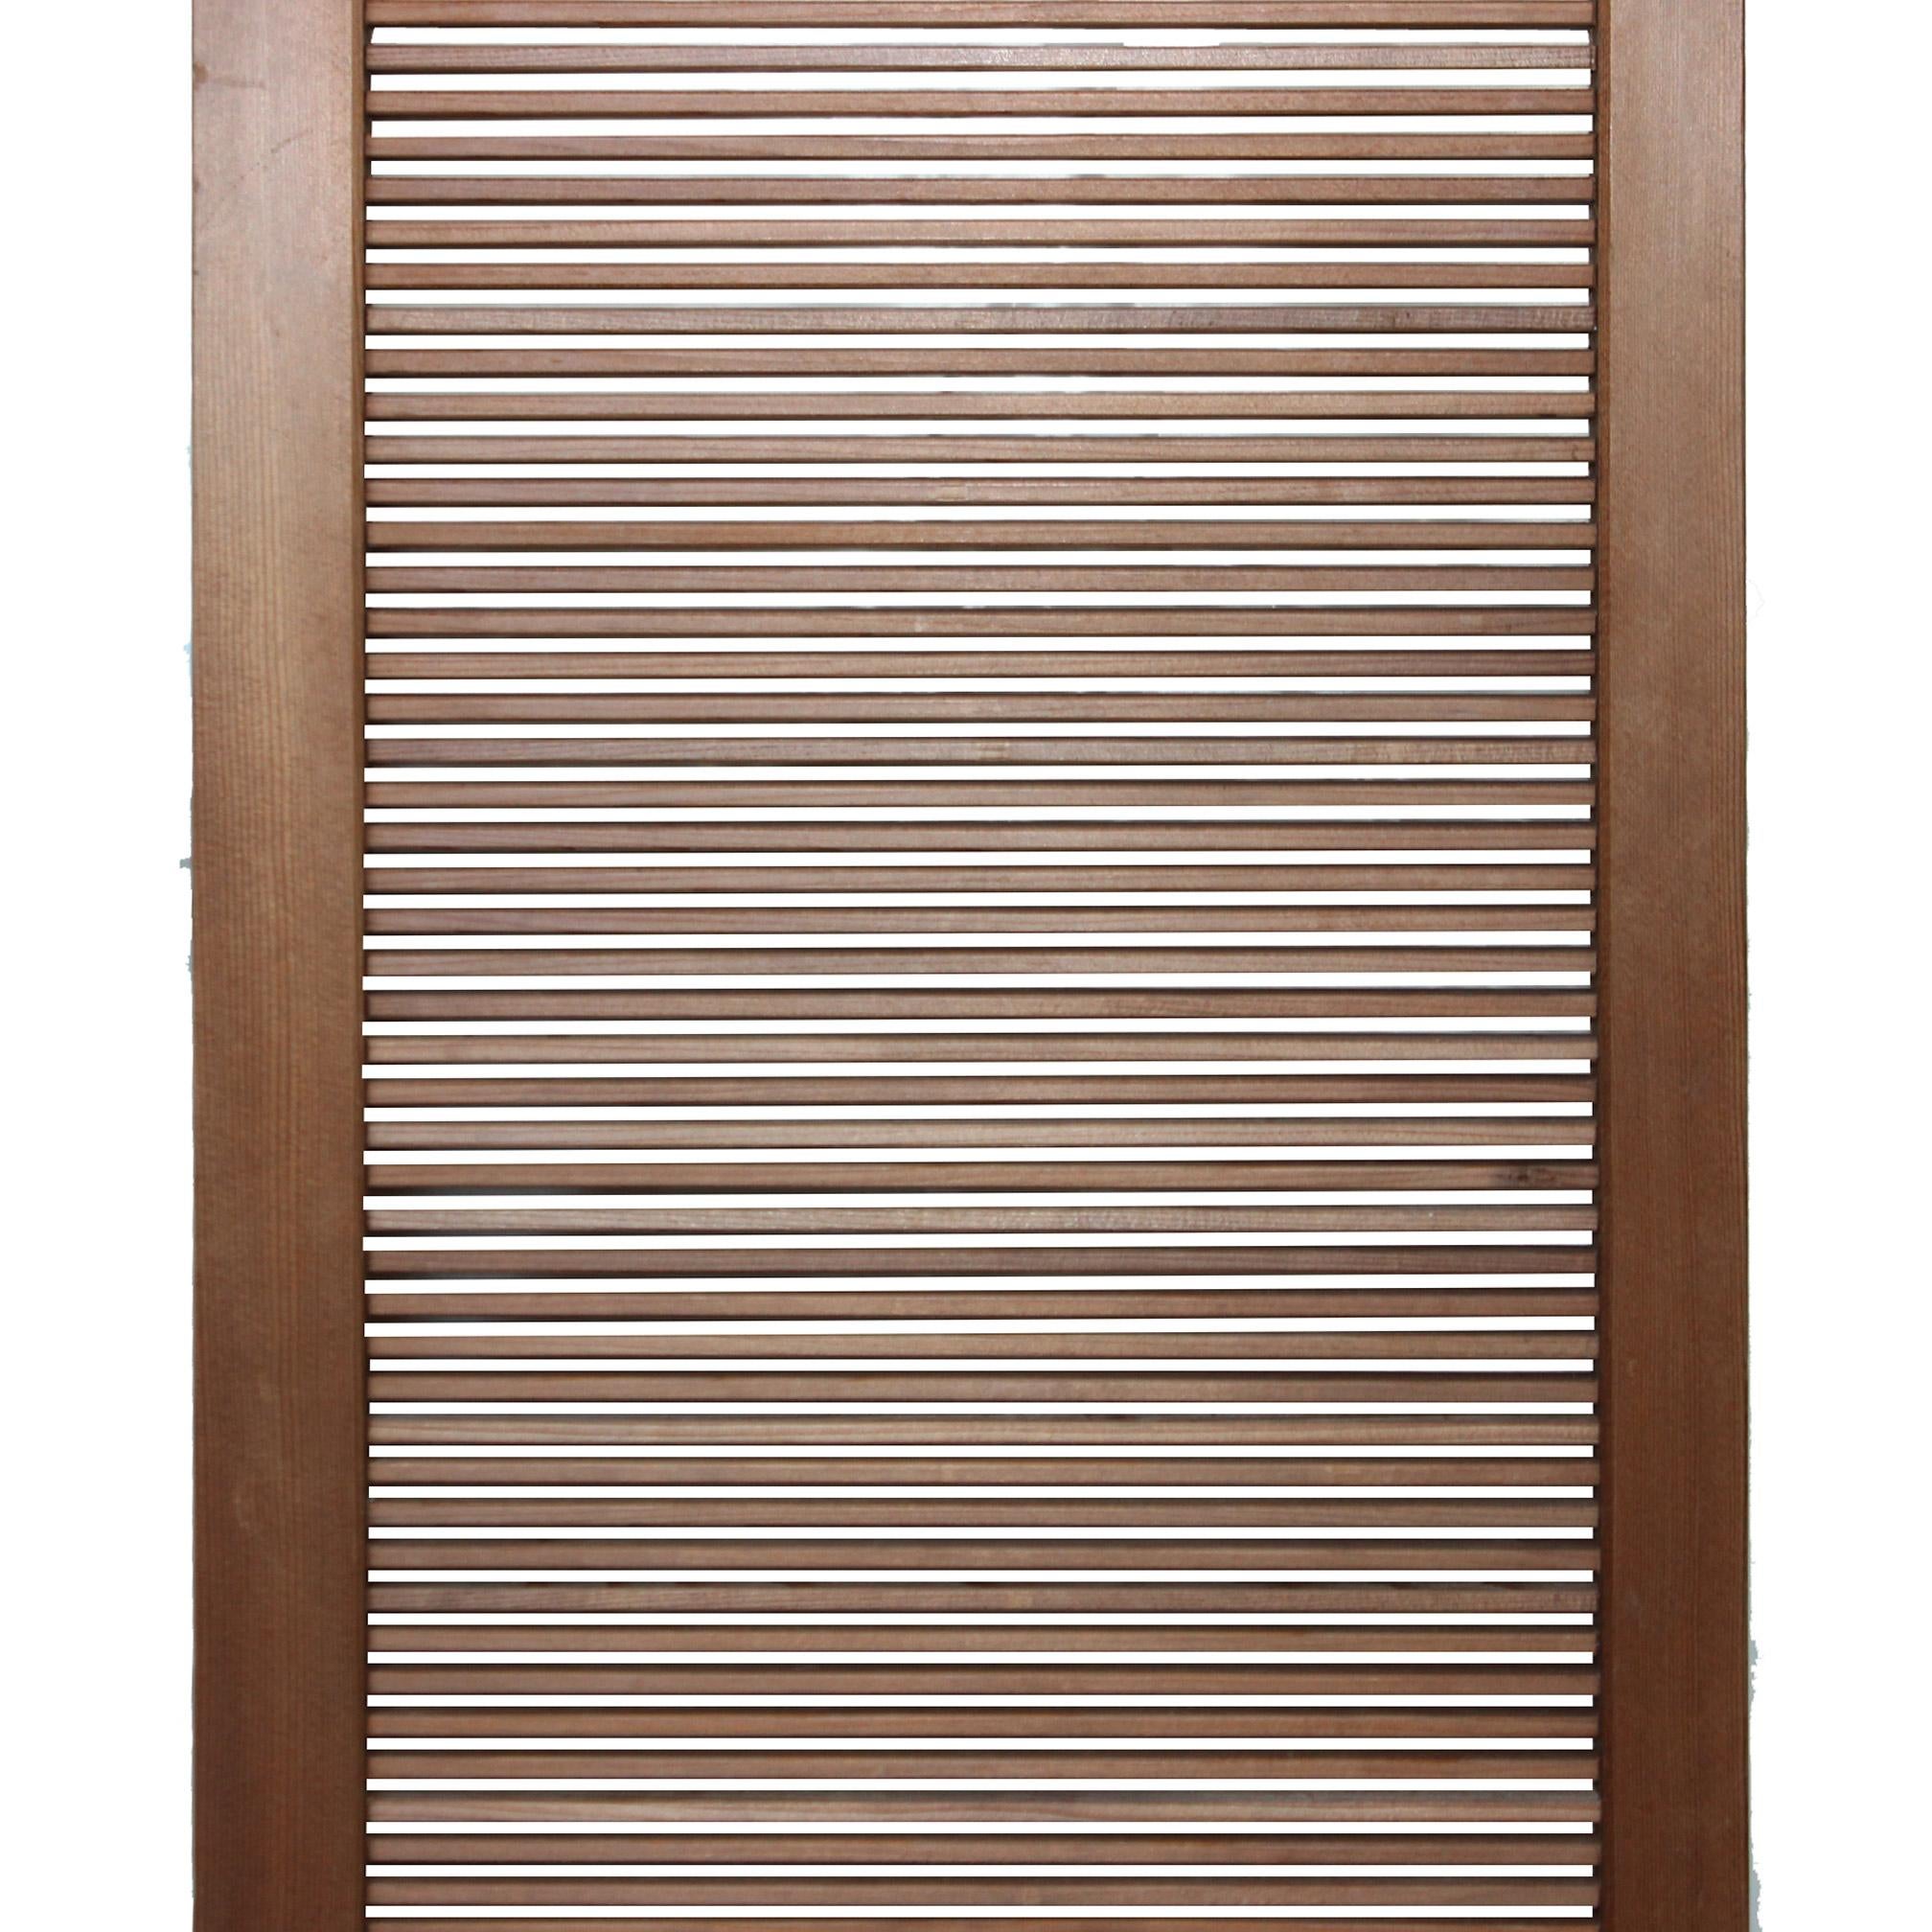 Japanese cedar wood transom with slat design originally used in between doorways as decorative accents. Rice paper was glued to the back to keep the heat inside the room. Hang on the wall as artwork.